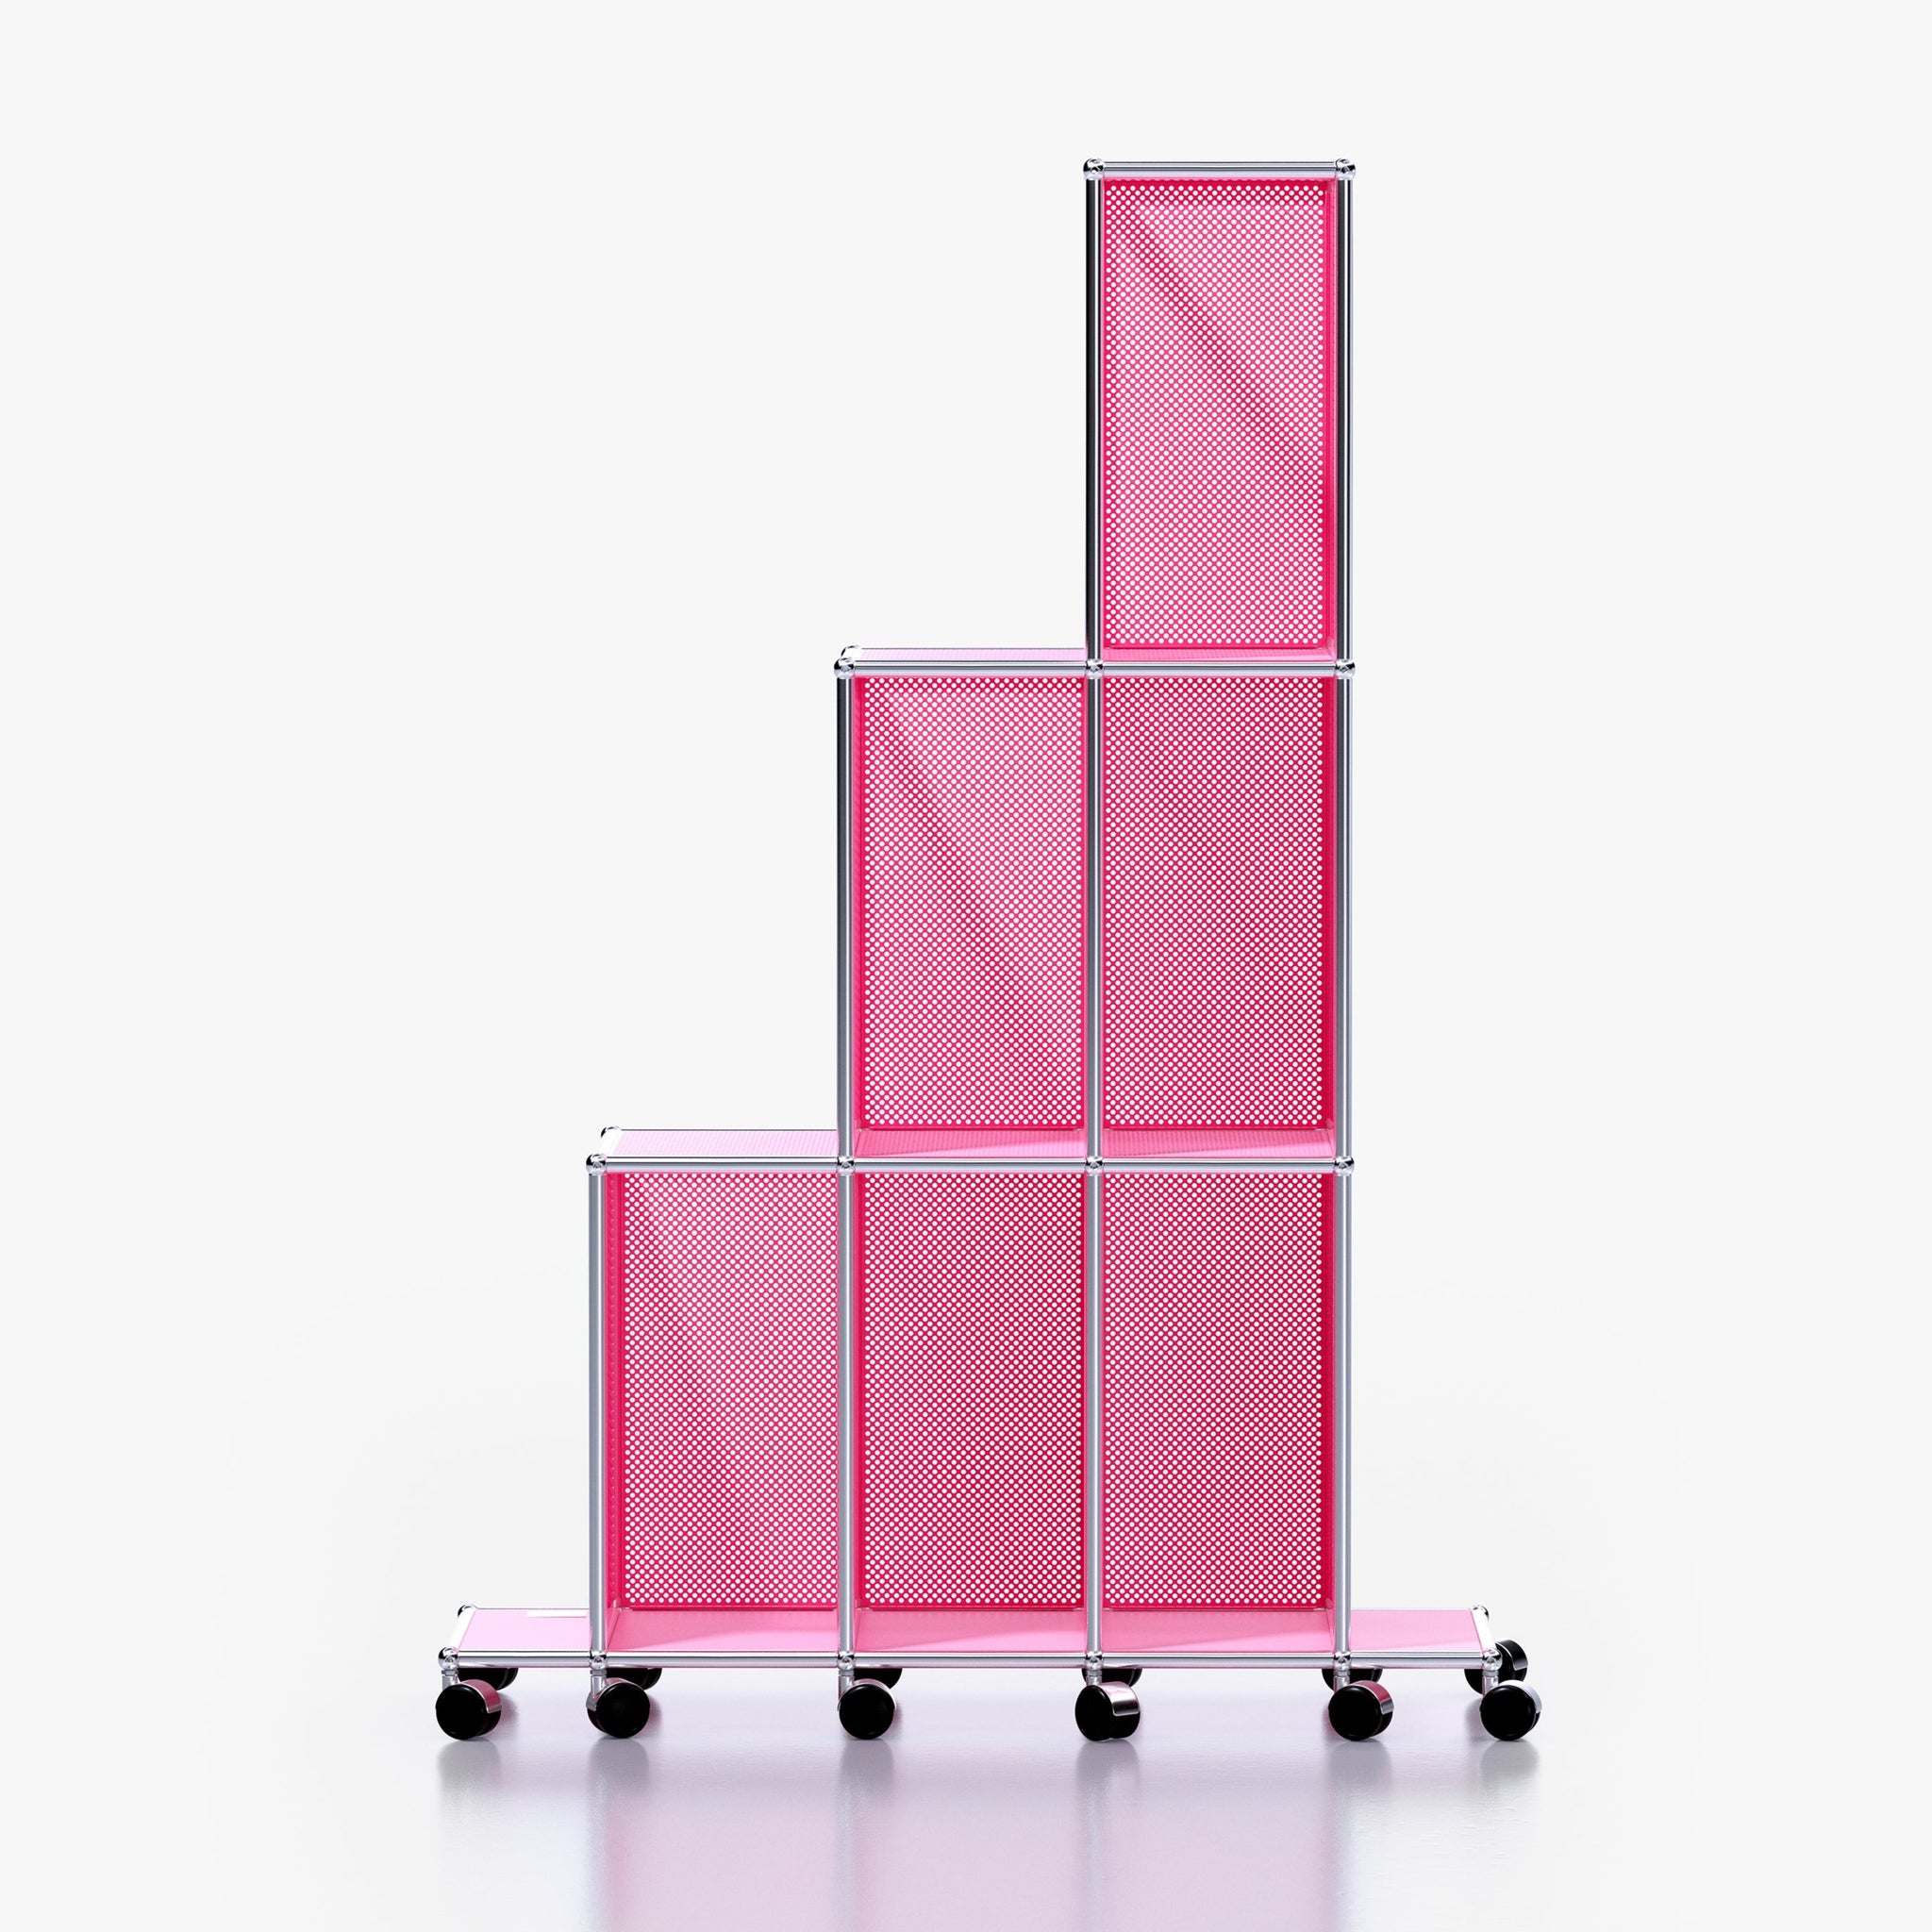 Tower C (Forward): Rolling Tiered Shelving Unit in Downtown Pink (Front View)